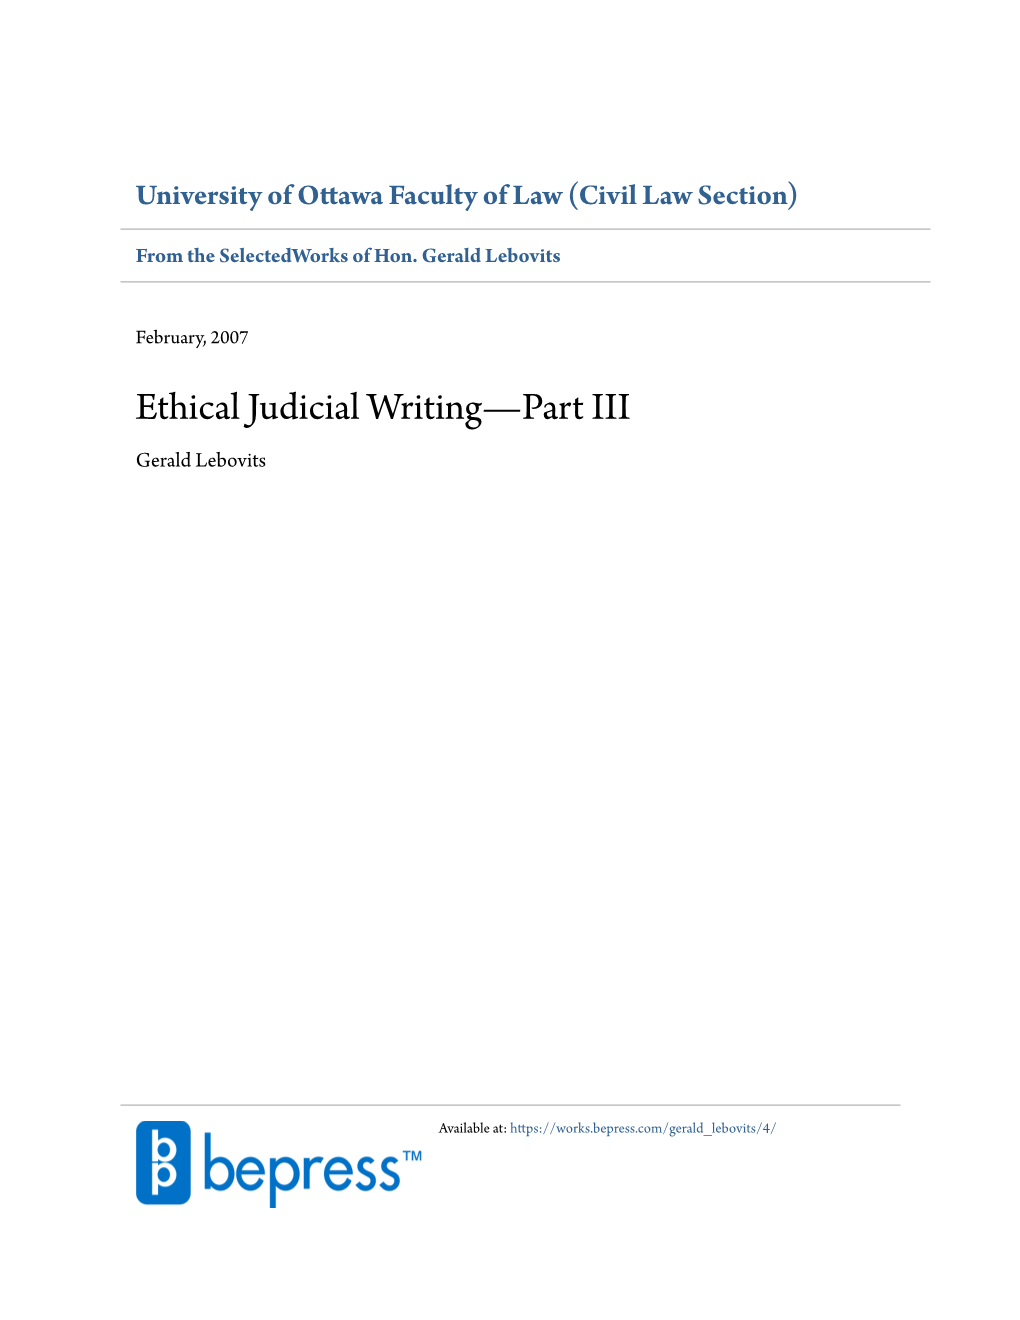 Ethical Judicial Writing—Part III Gerald Lebovits